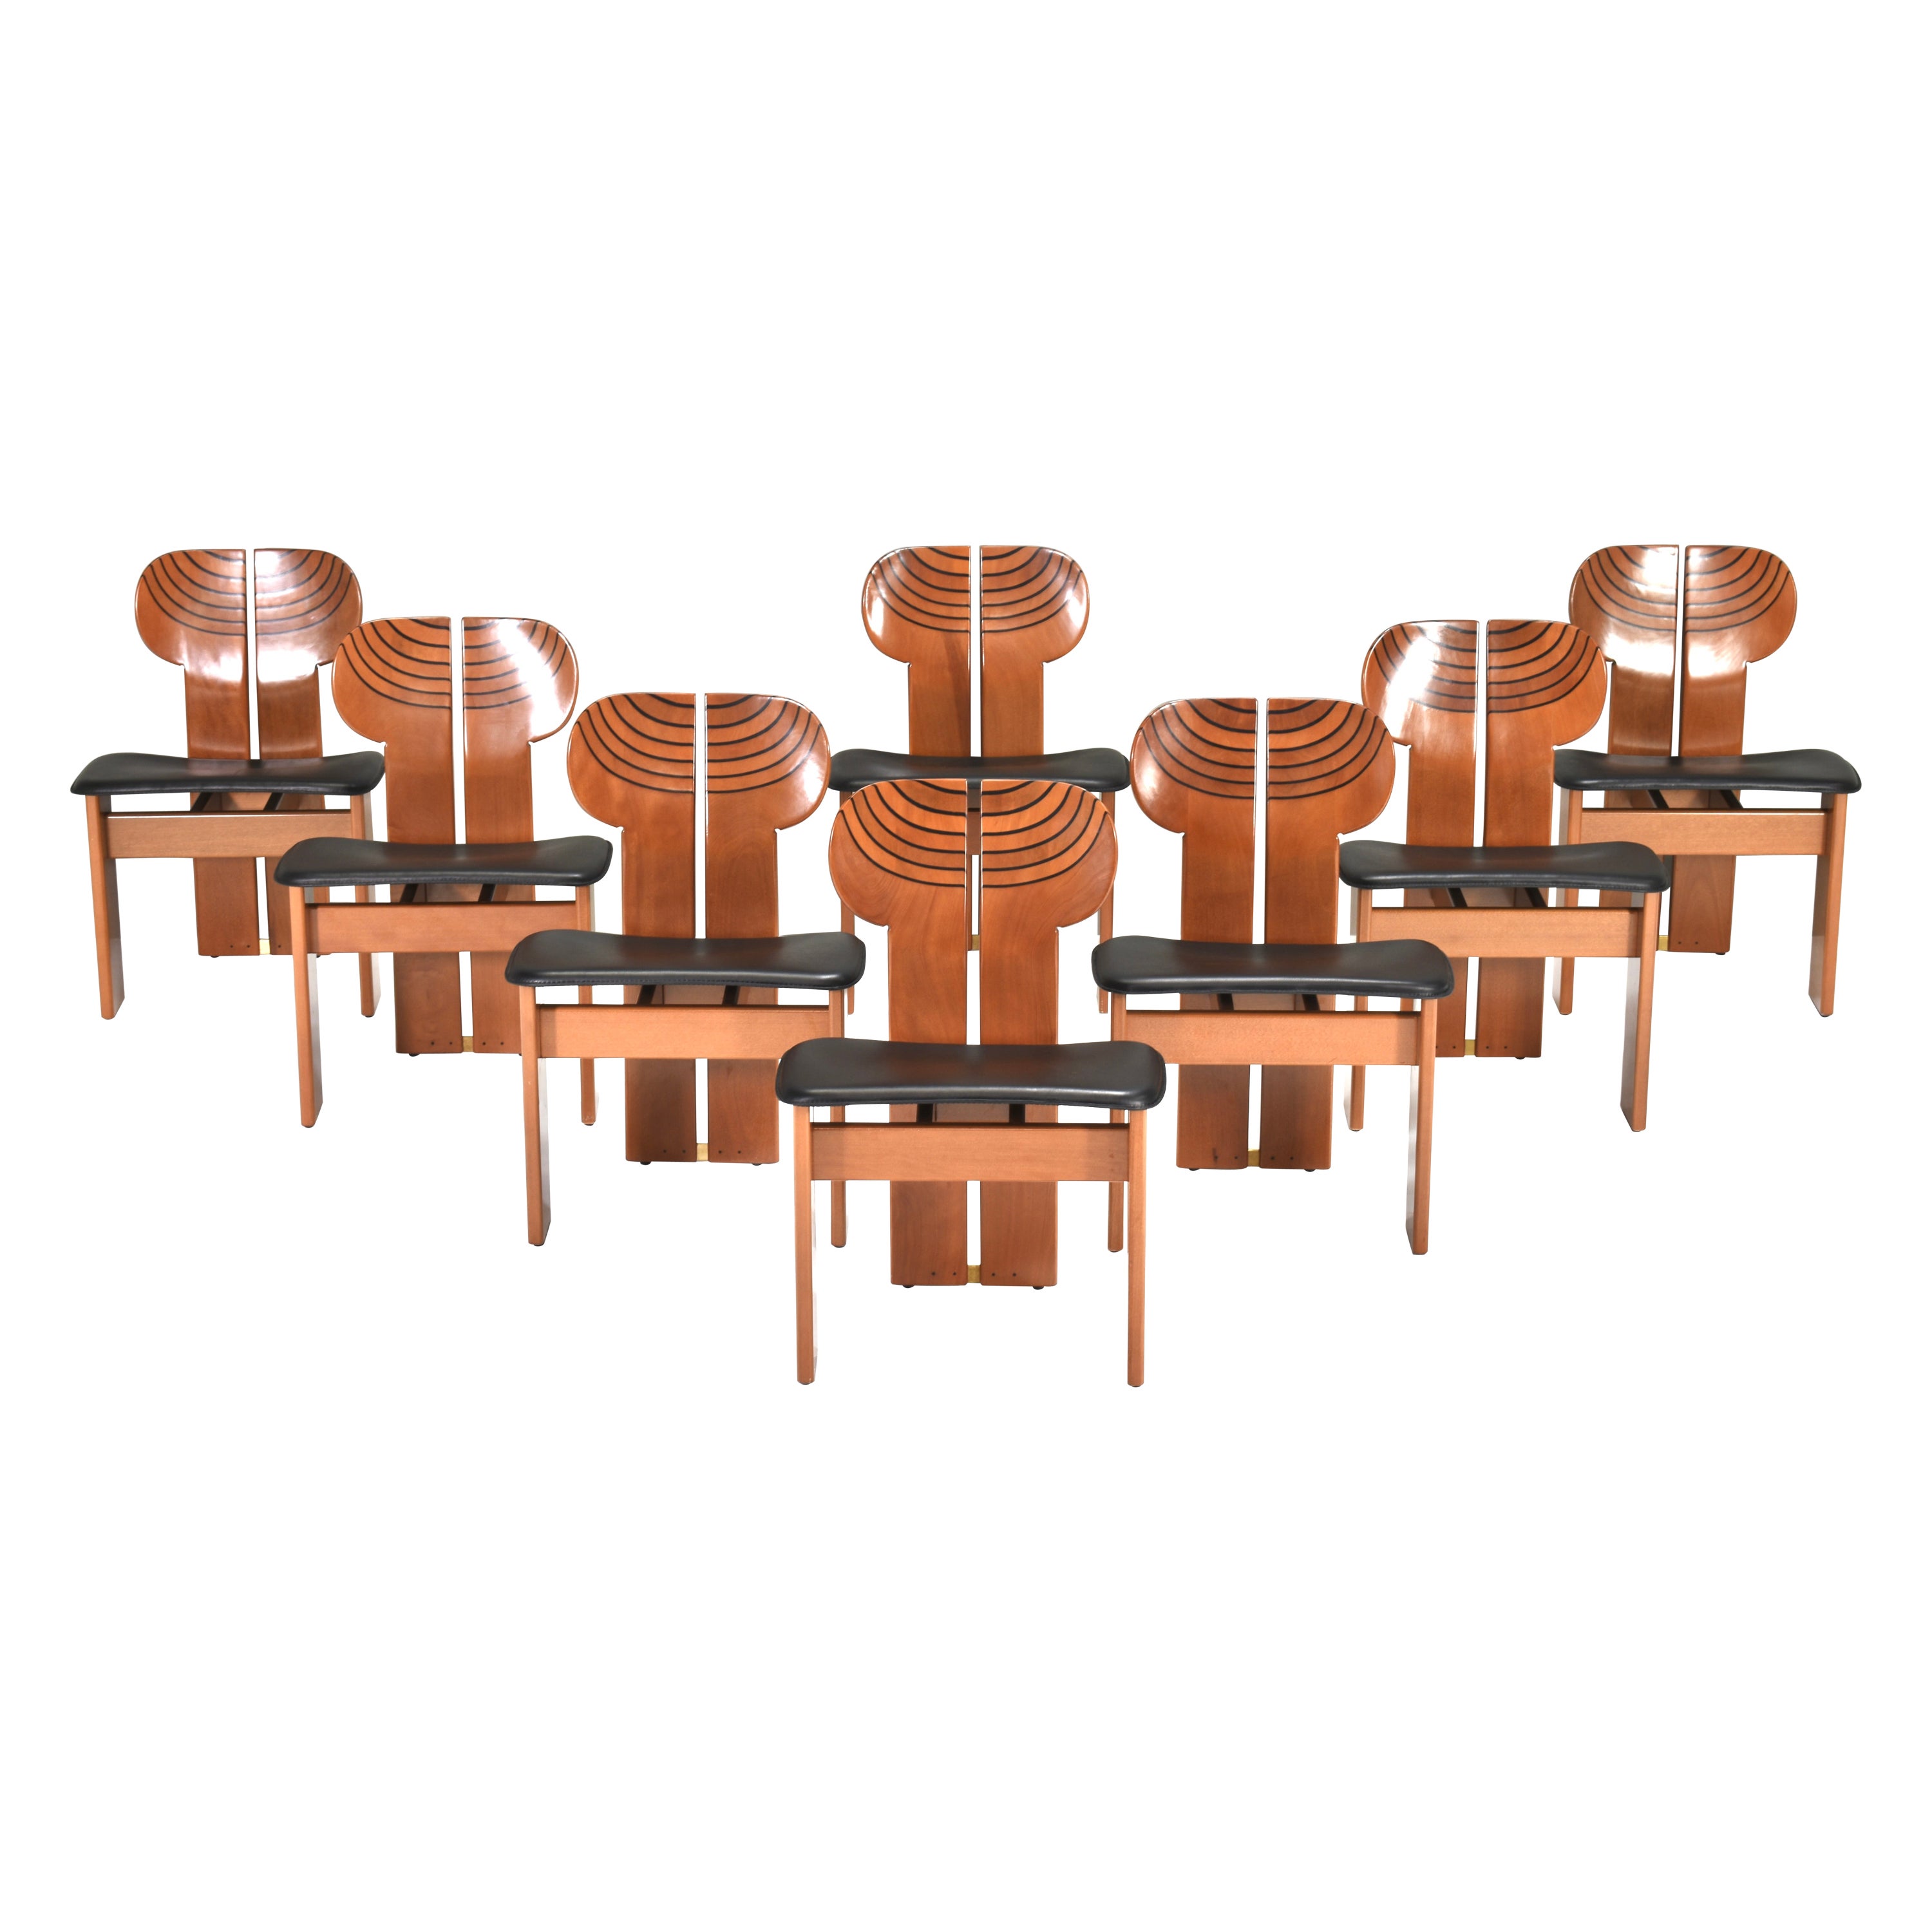 Africa Chairs by Afra & Tobia Scarpa for Maxalto, Italy - 1975, set of 8  For Sale